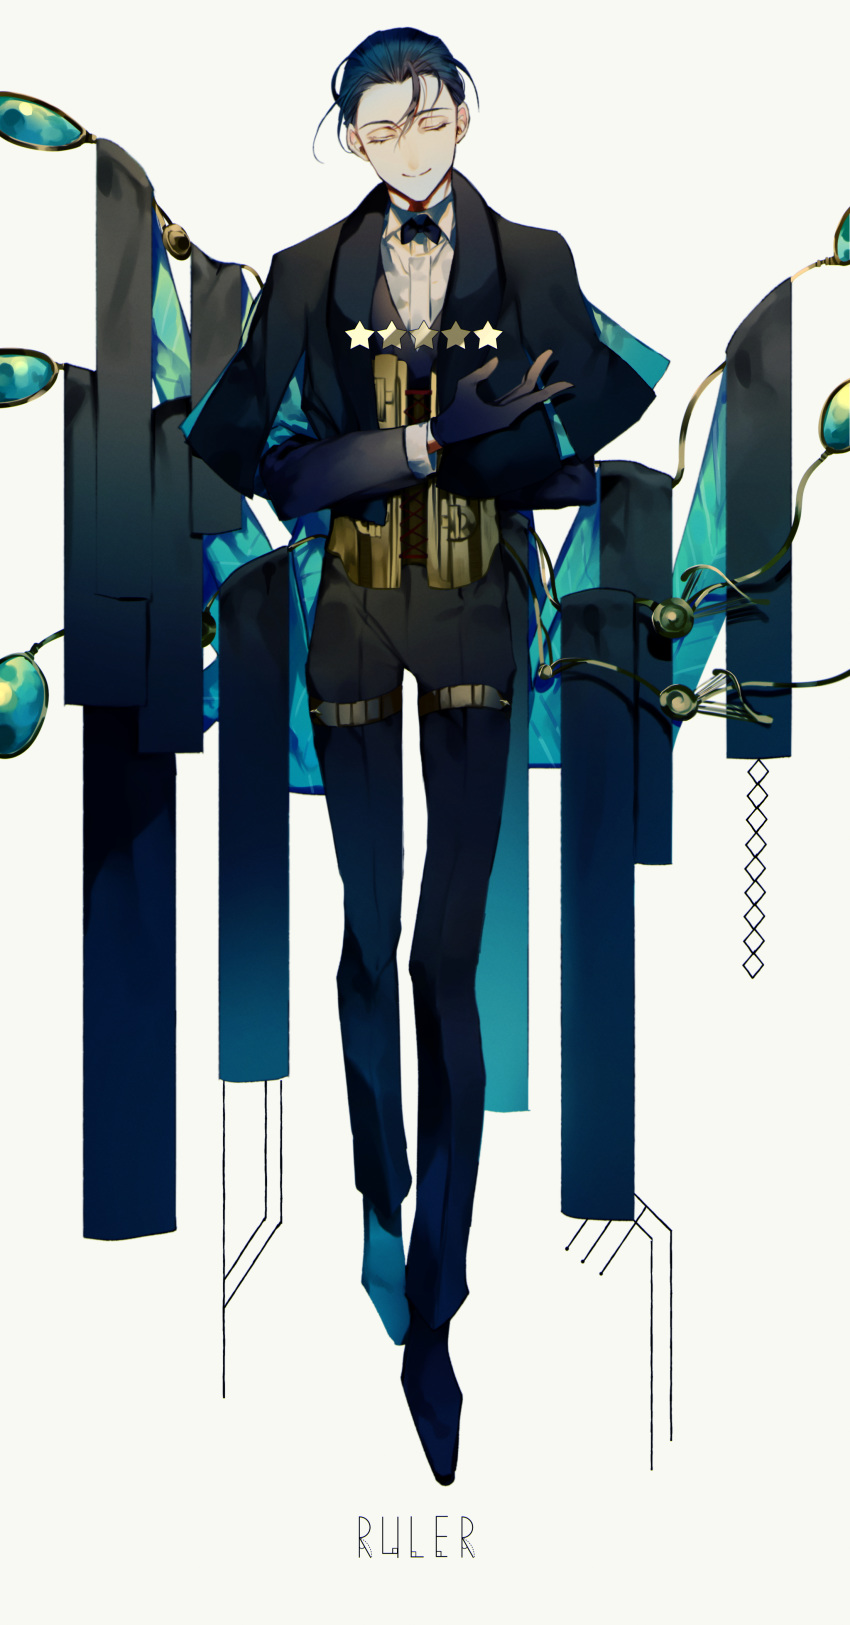 1boy absurdres albino_(a1b1n0623) bangs black_gloves black_hair black_suit bow bowtie closed_eyes english_text facing_viewer fate/grand_order fate_(series) formal full_body gloves hair_slicked_back highres long_sleeves magnifying_glass male_focus parted_bangs sherlock_holmes_(fate/grand_order) shiny shiny_hair shirt shoes smile solo star_(symbol) upper_body white_shirt